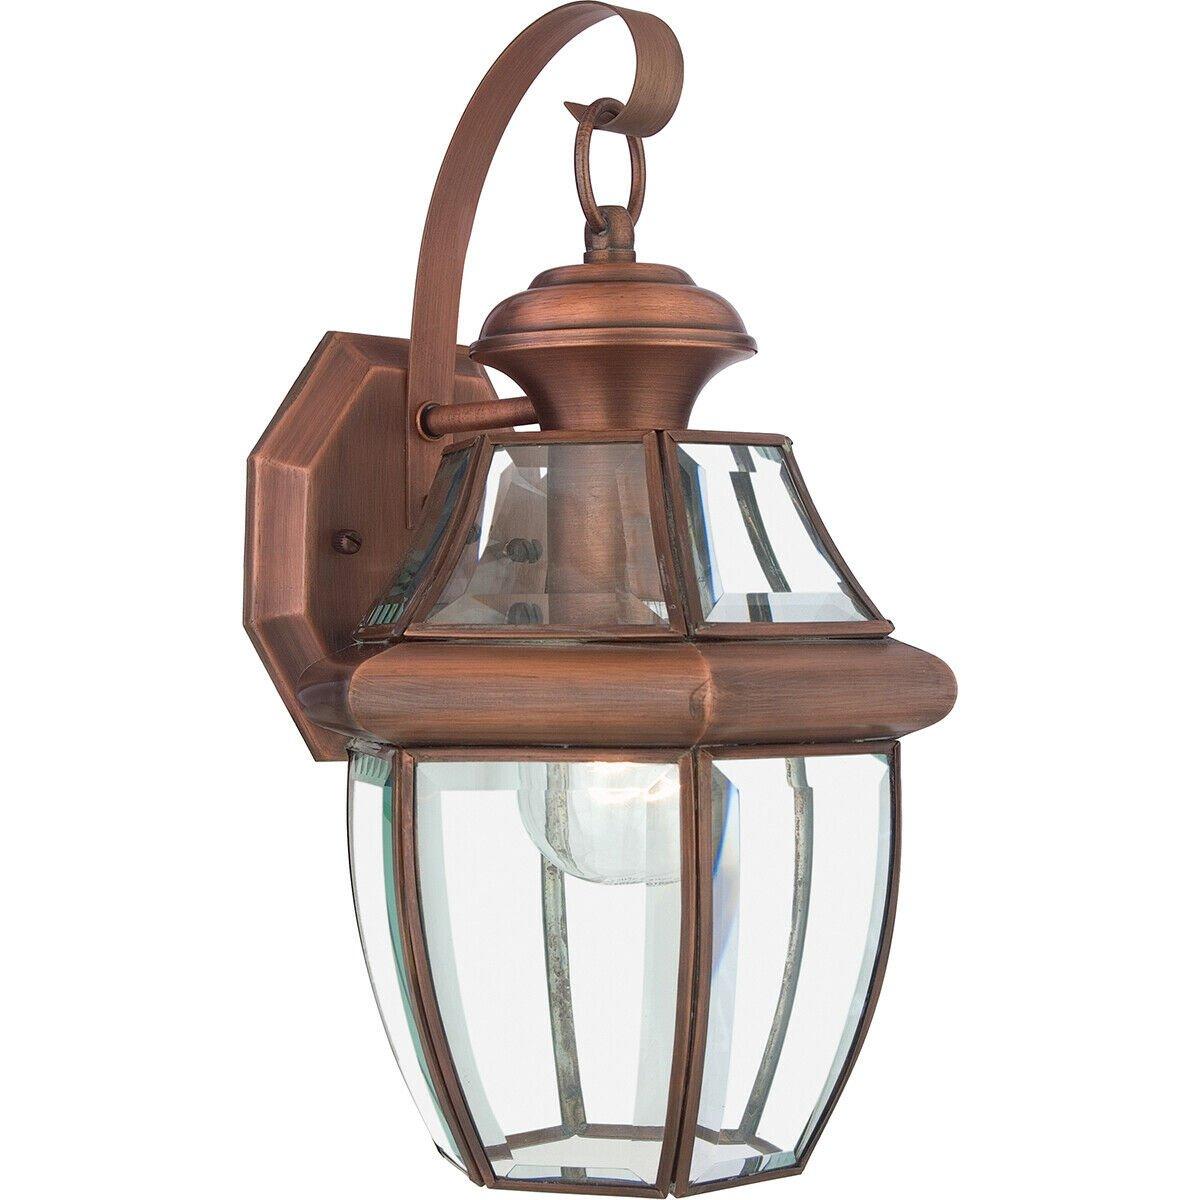 Outdoor IP44 Wall Light Sconce Aged Copper LED E27 100W Bulb Outside External